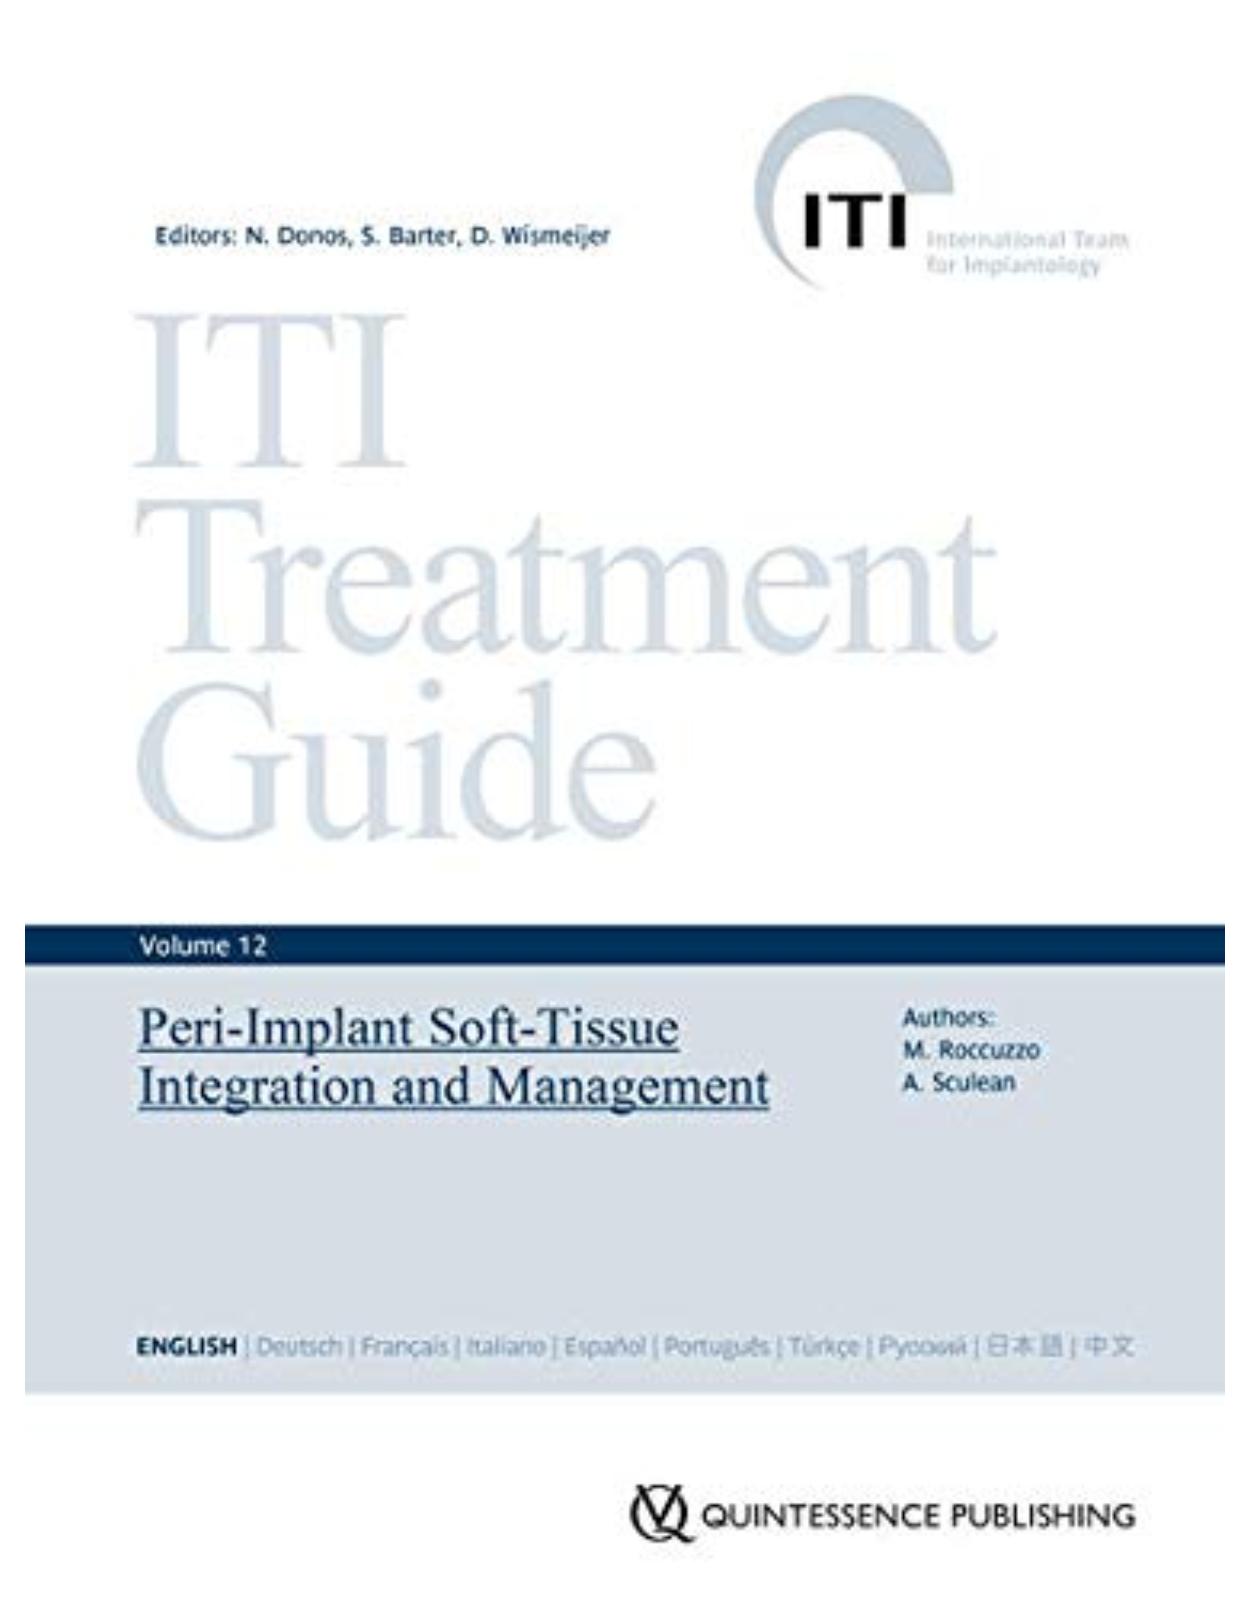 ITI Treatment Guide Vol 12: Peri-Implant Soft-Tissue Integration and Management